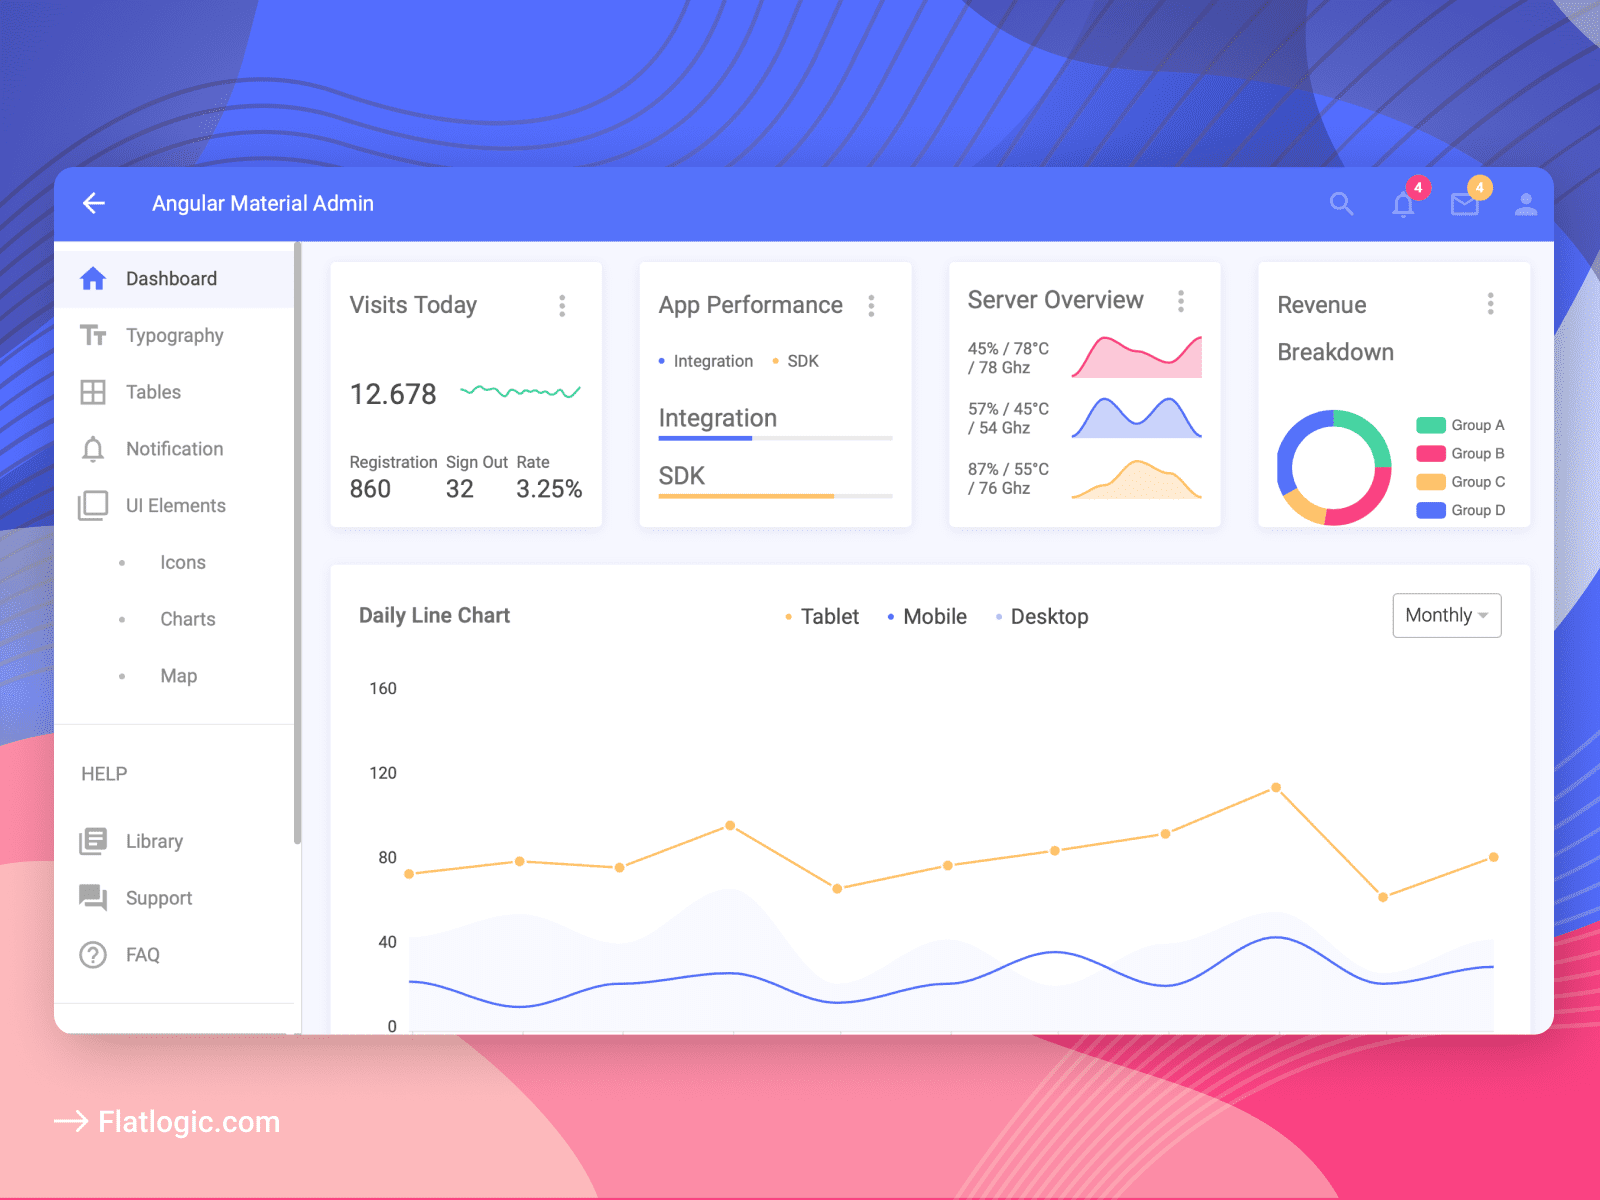 Angular Material Admin Template is Released!